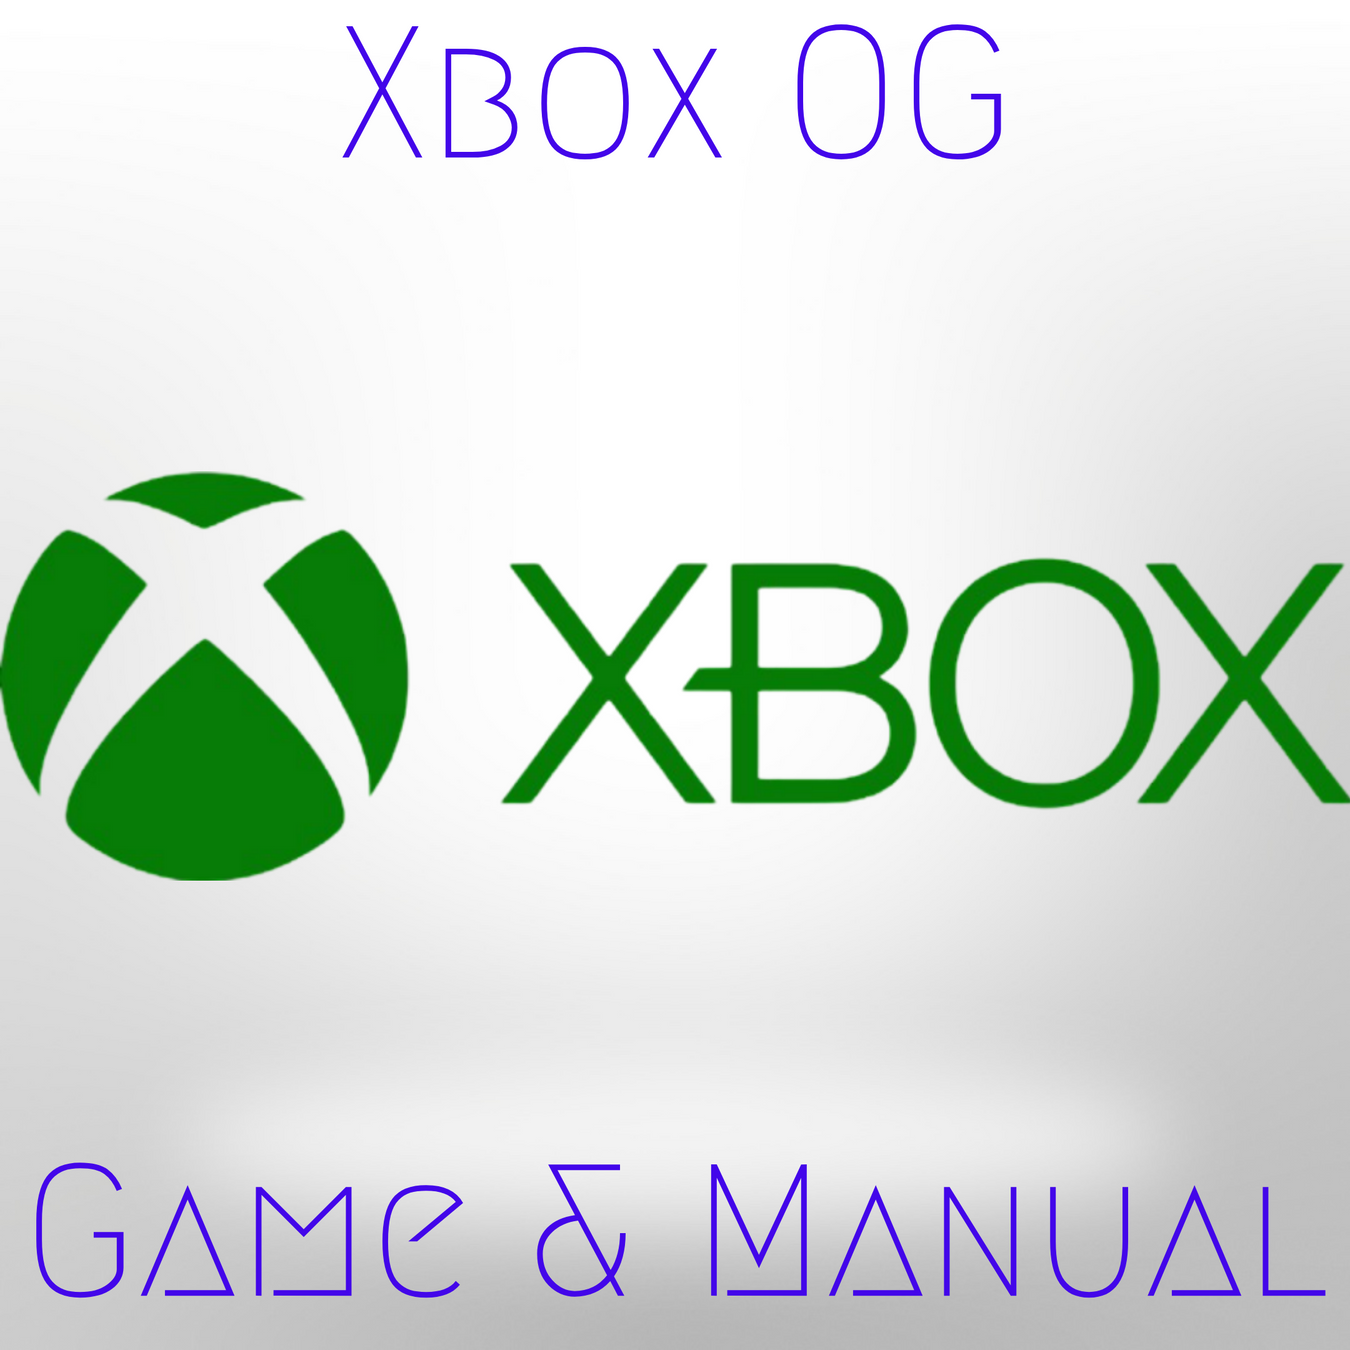 Game & Manual only no box is included